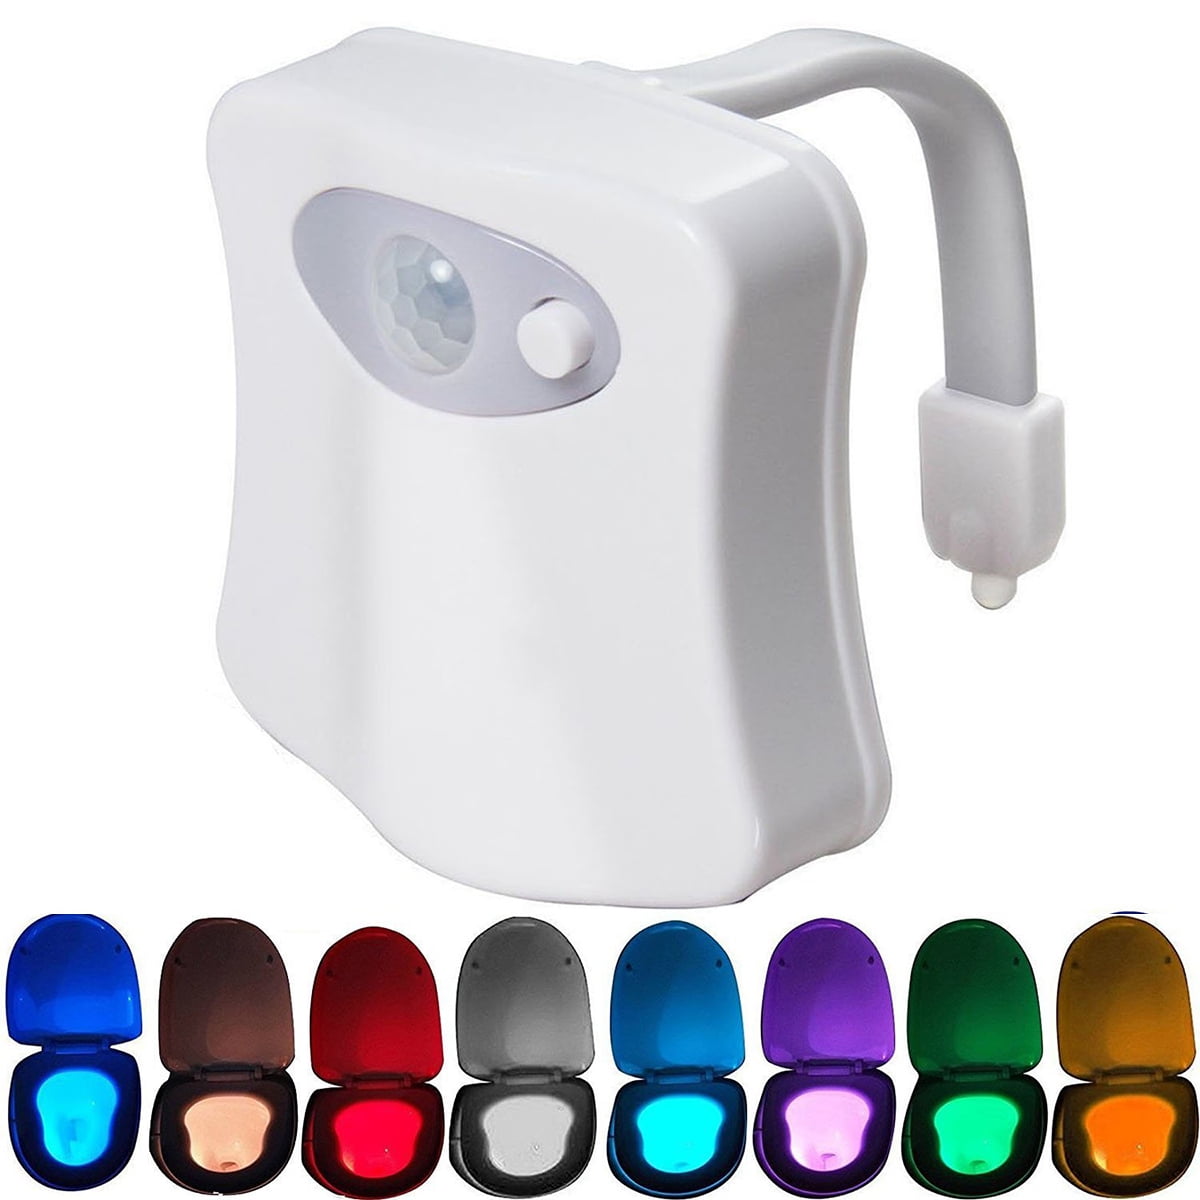 Toilet Night Light 2Pack 8-Color Motion Activated Bathroom LED Nightlight 2 in White